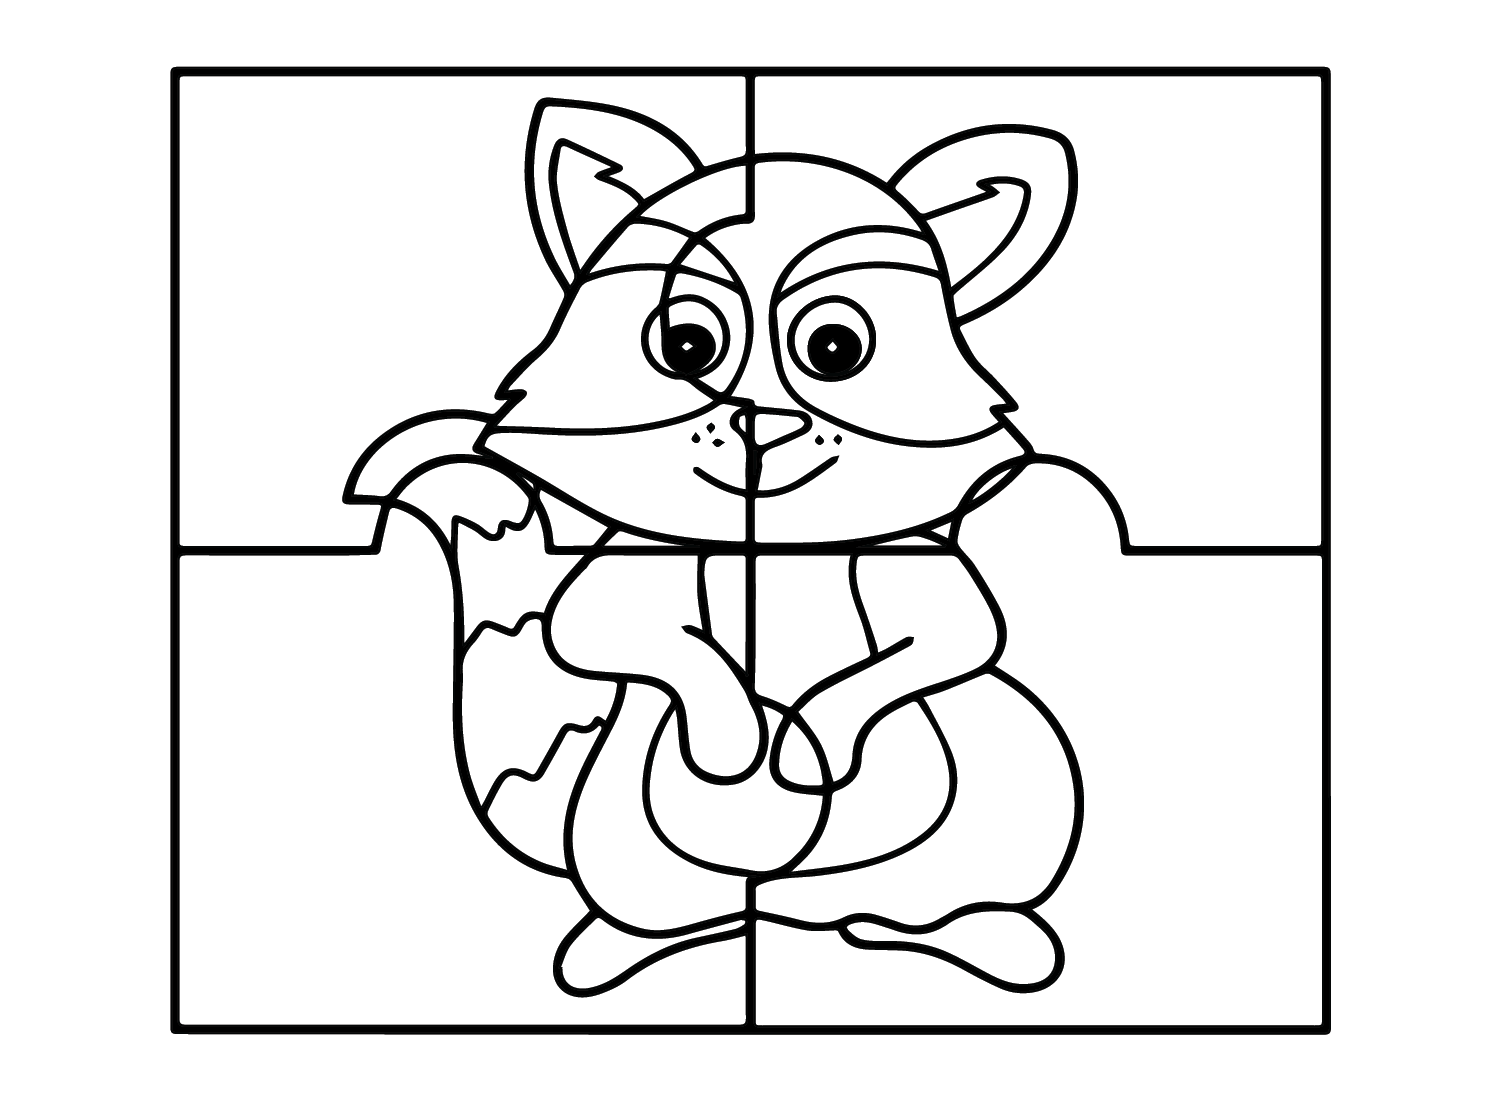 Drawing Jigsaw Puzzle Coloring Page